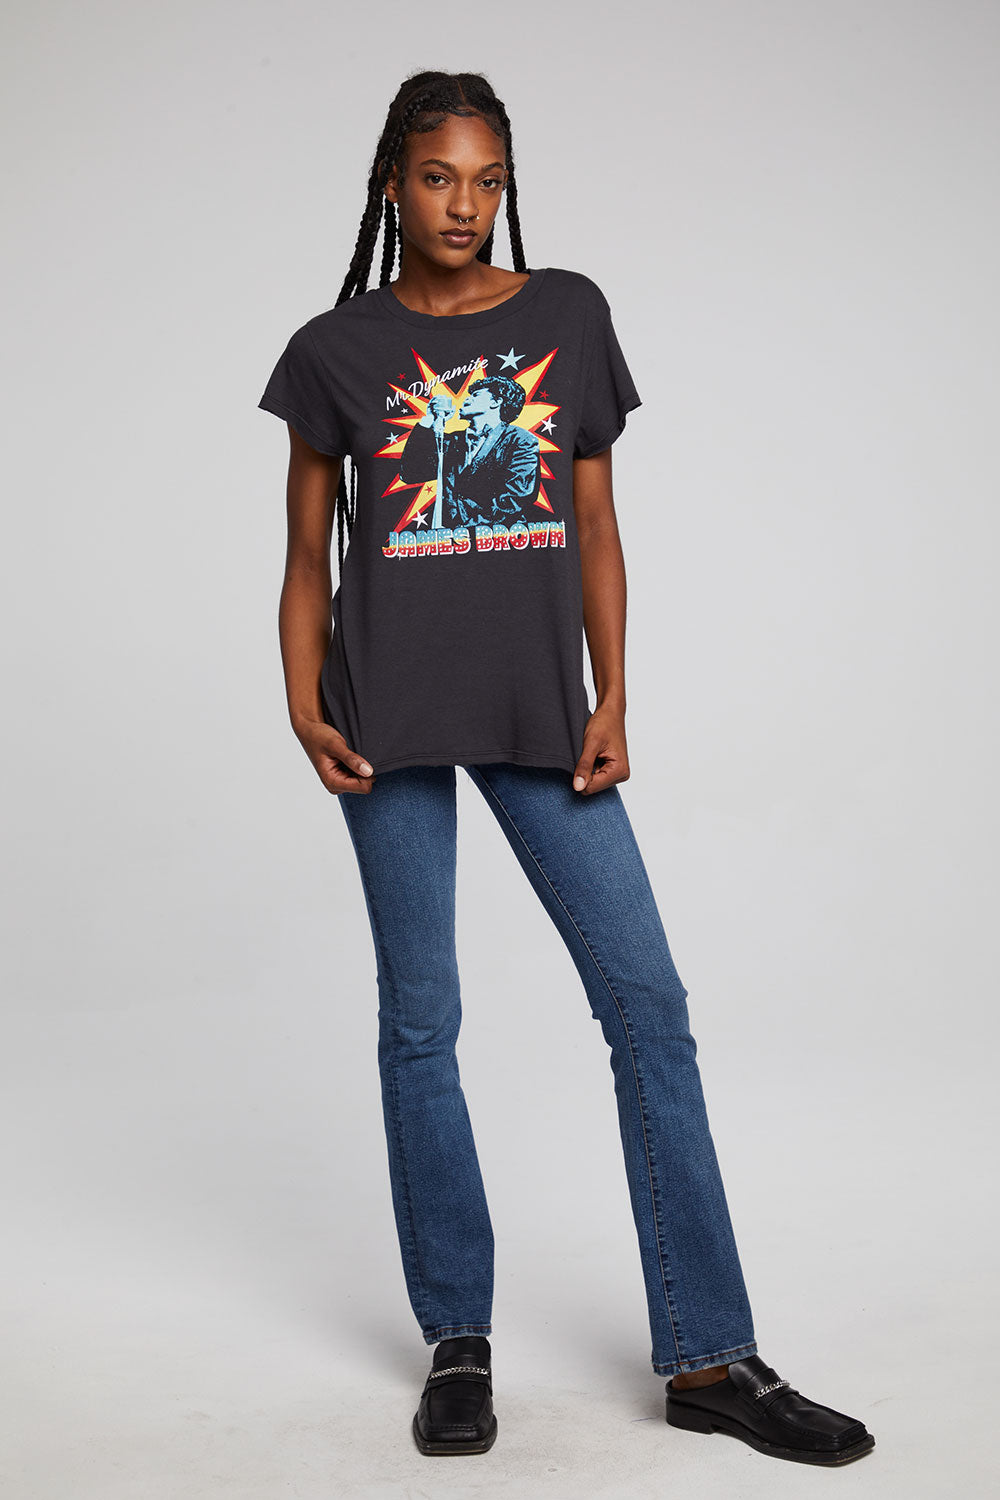 James Brown Mr. Dynamite Tee WOMENS chaserbrand